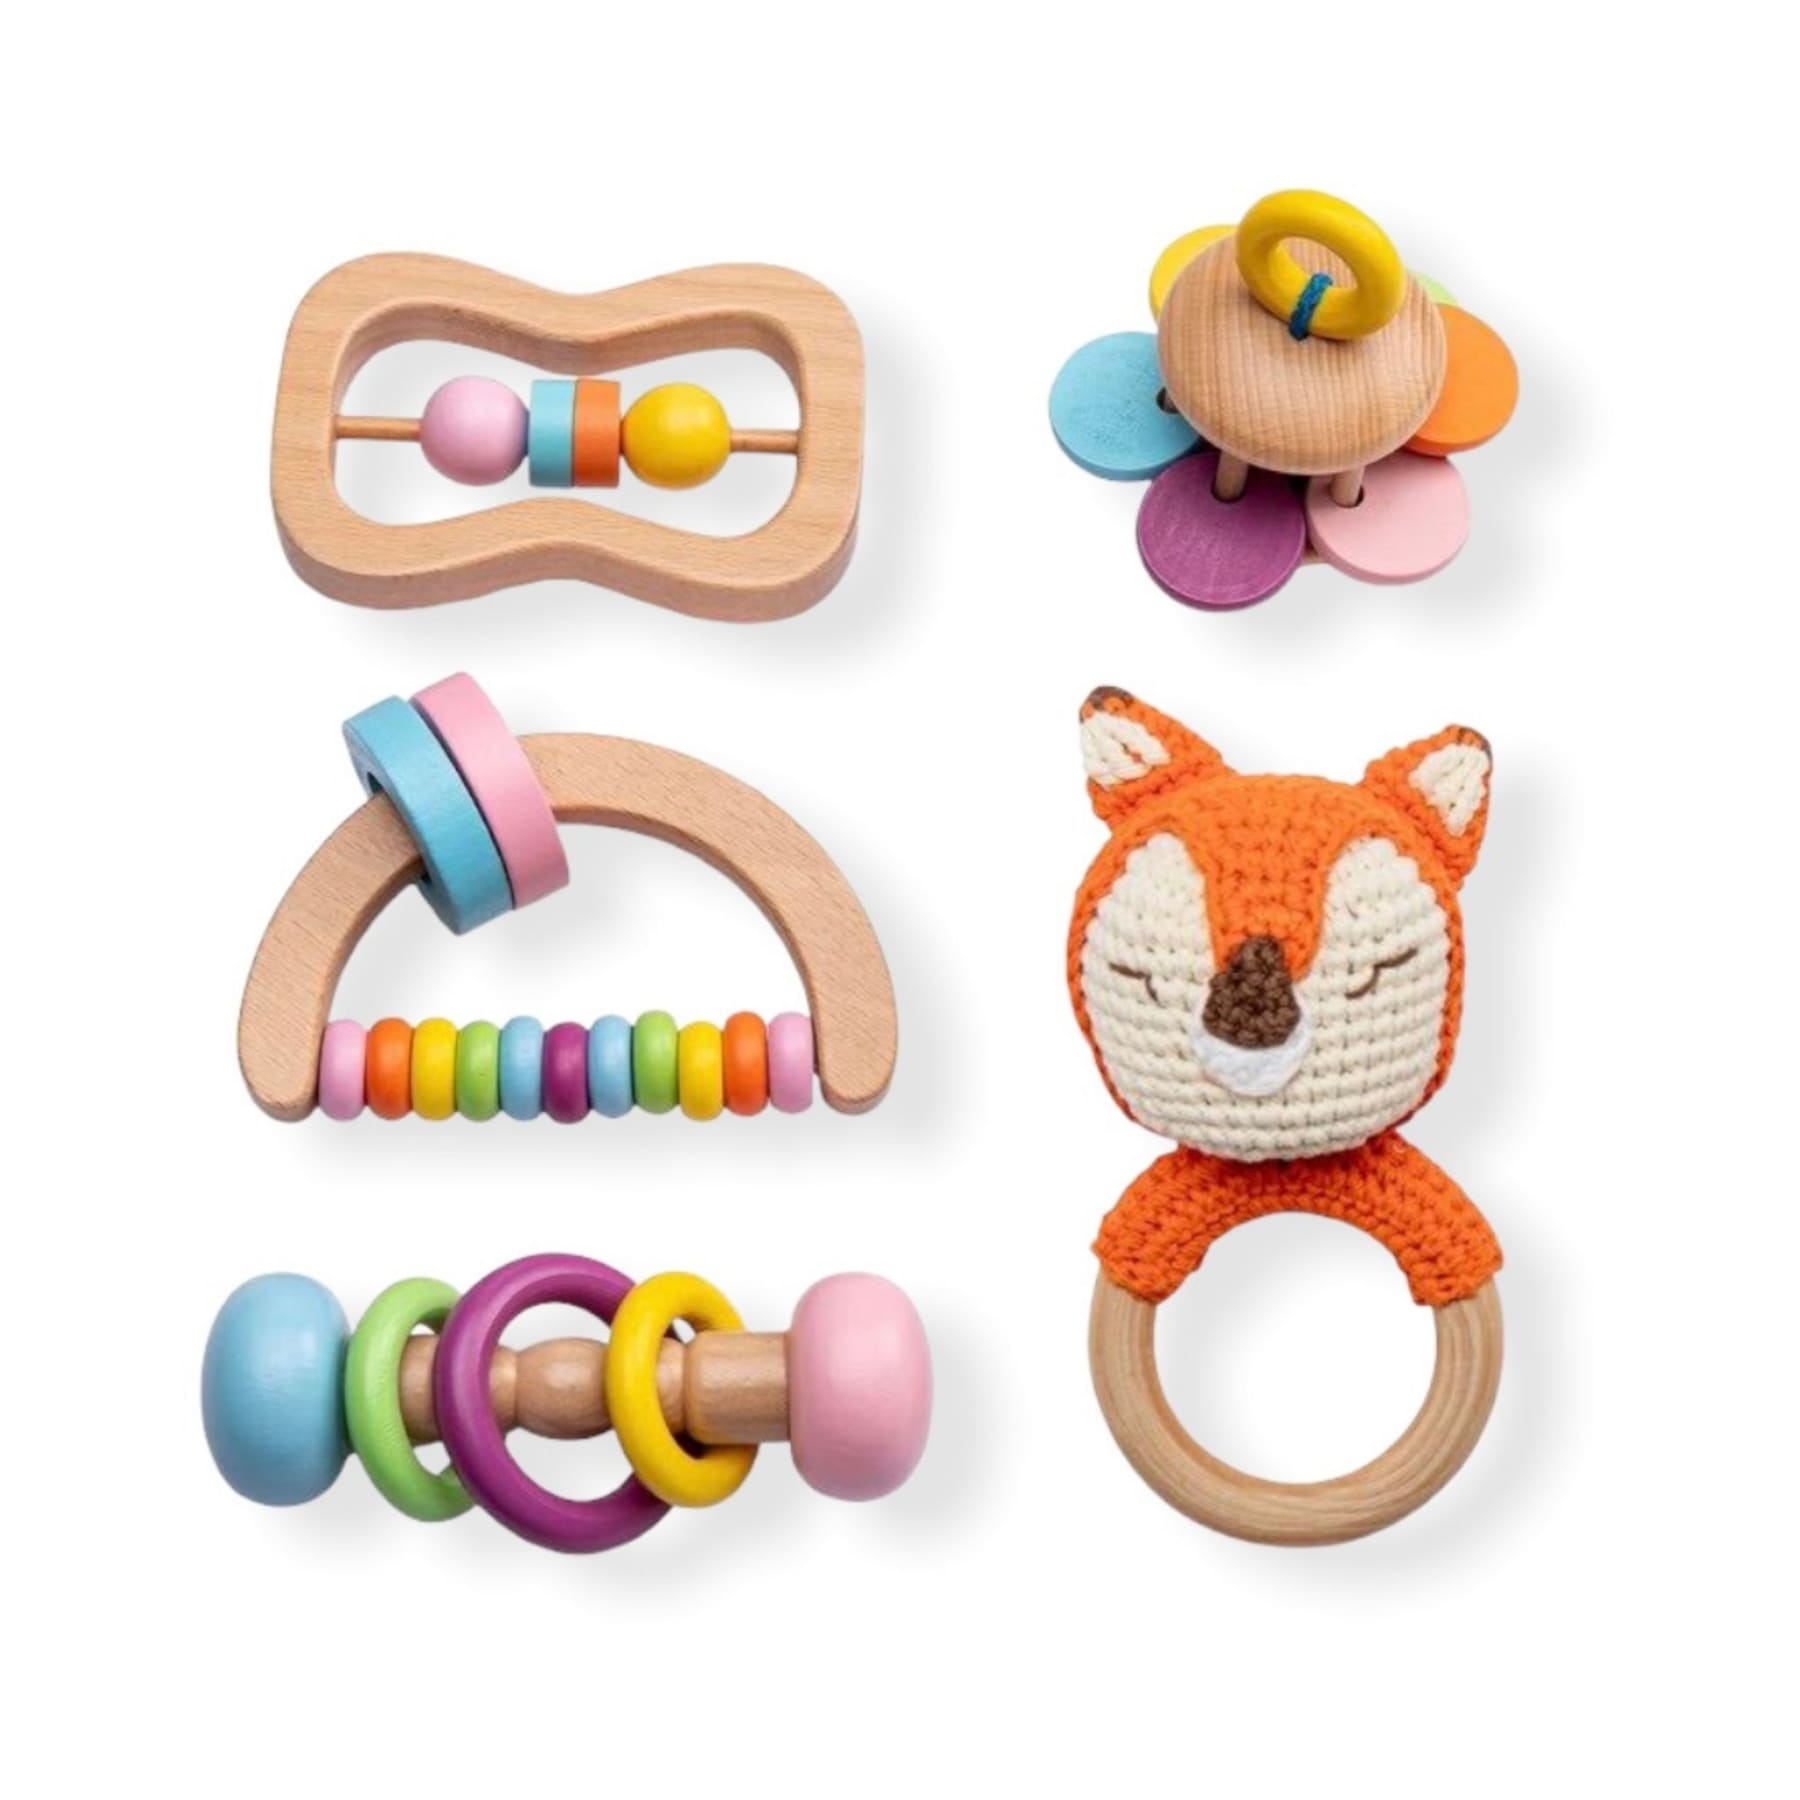 Fox Montessori wooden Toy Set for babies | wooden toys for toddlers and kids | hunny bubba kids